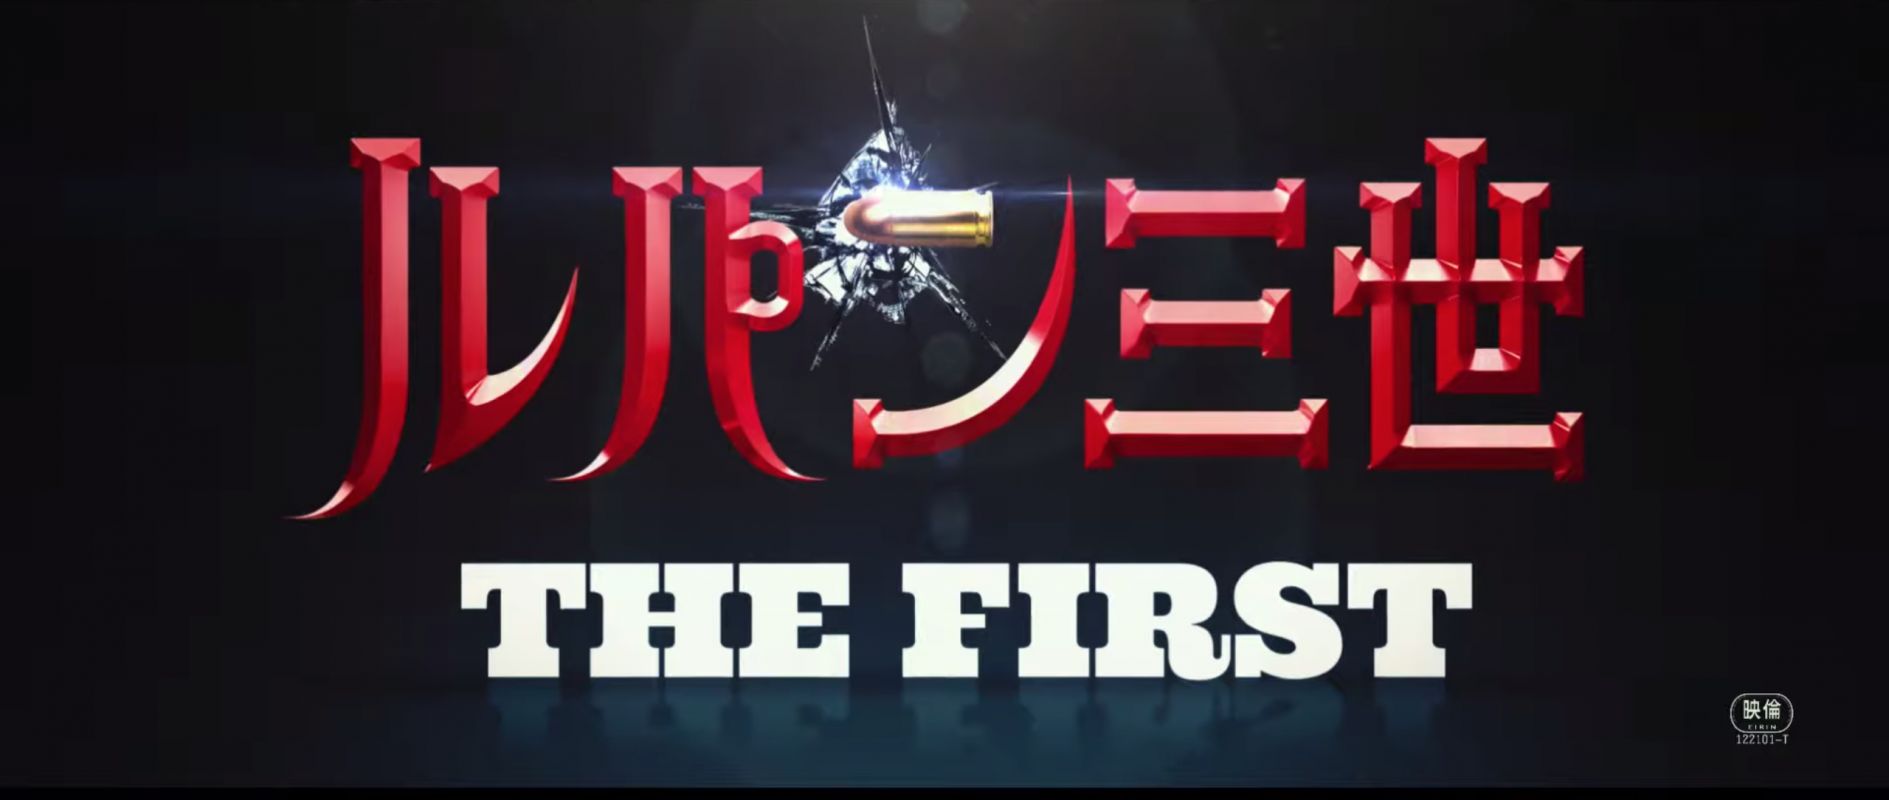 Premier trailer pour Lupin III The First